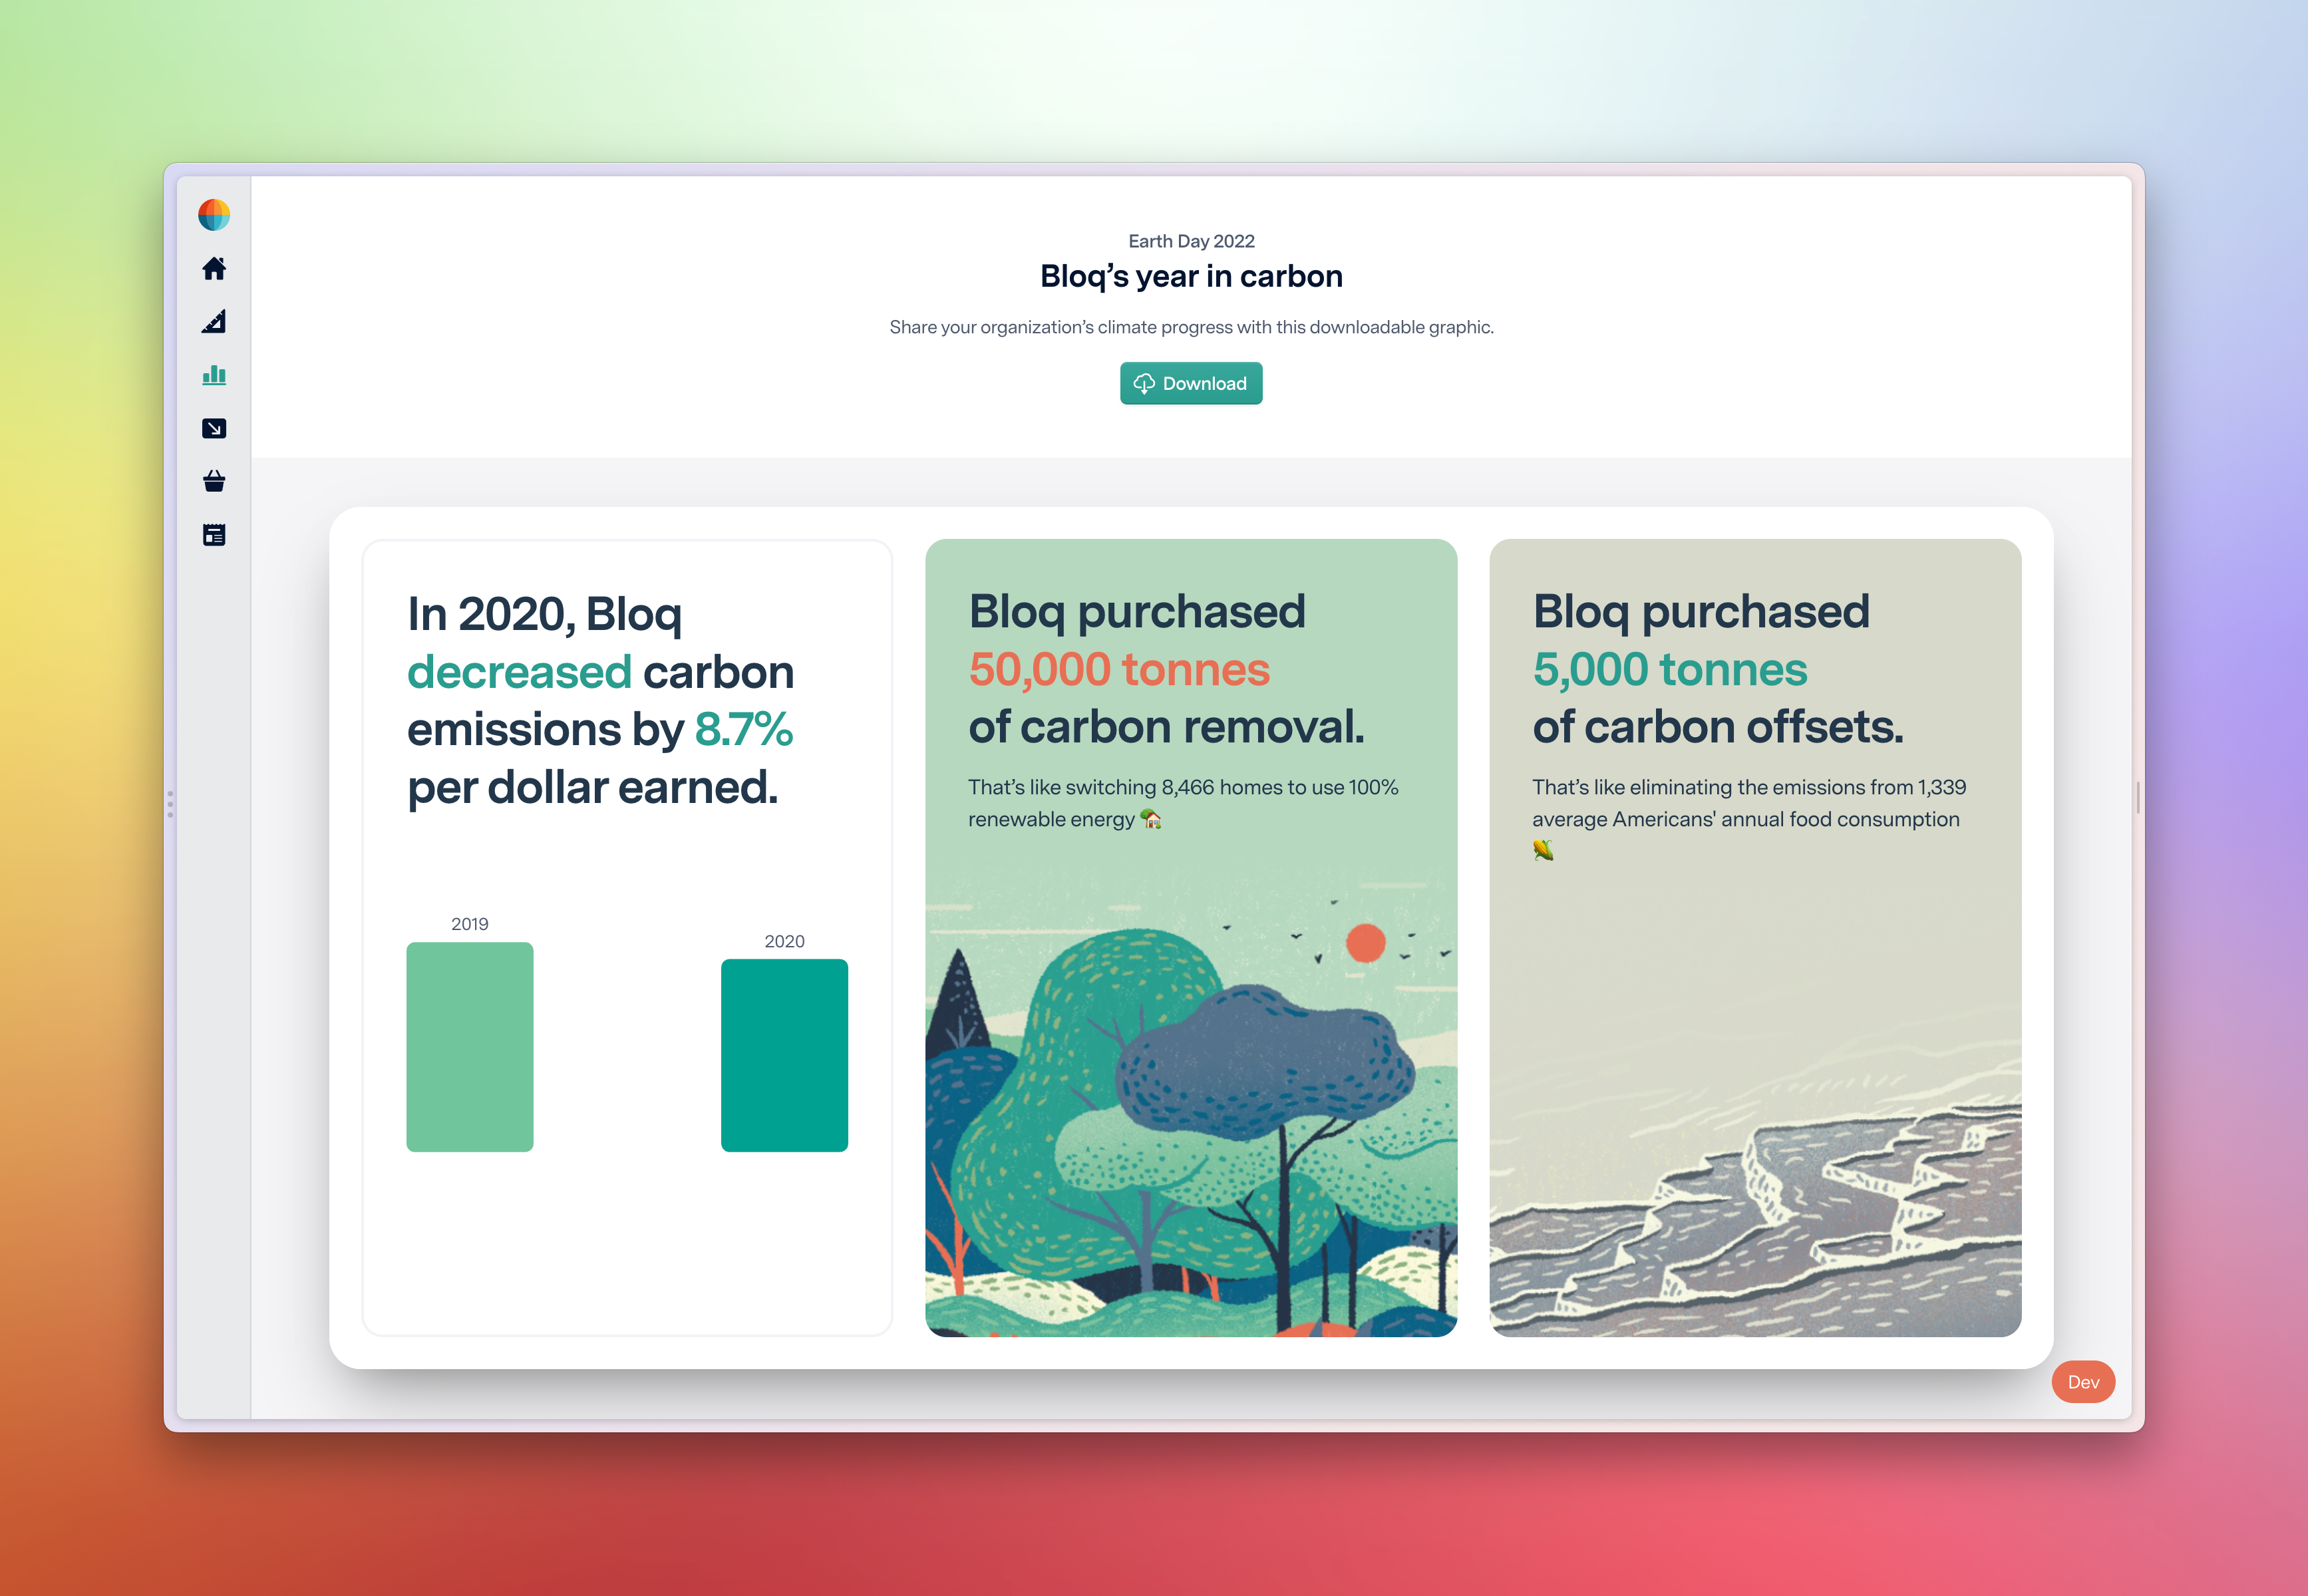 Screenshot of the tool in progress with “Bloq’s year in carbon” as a title, a download button, and three panes showing the company’s climate progress